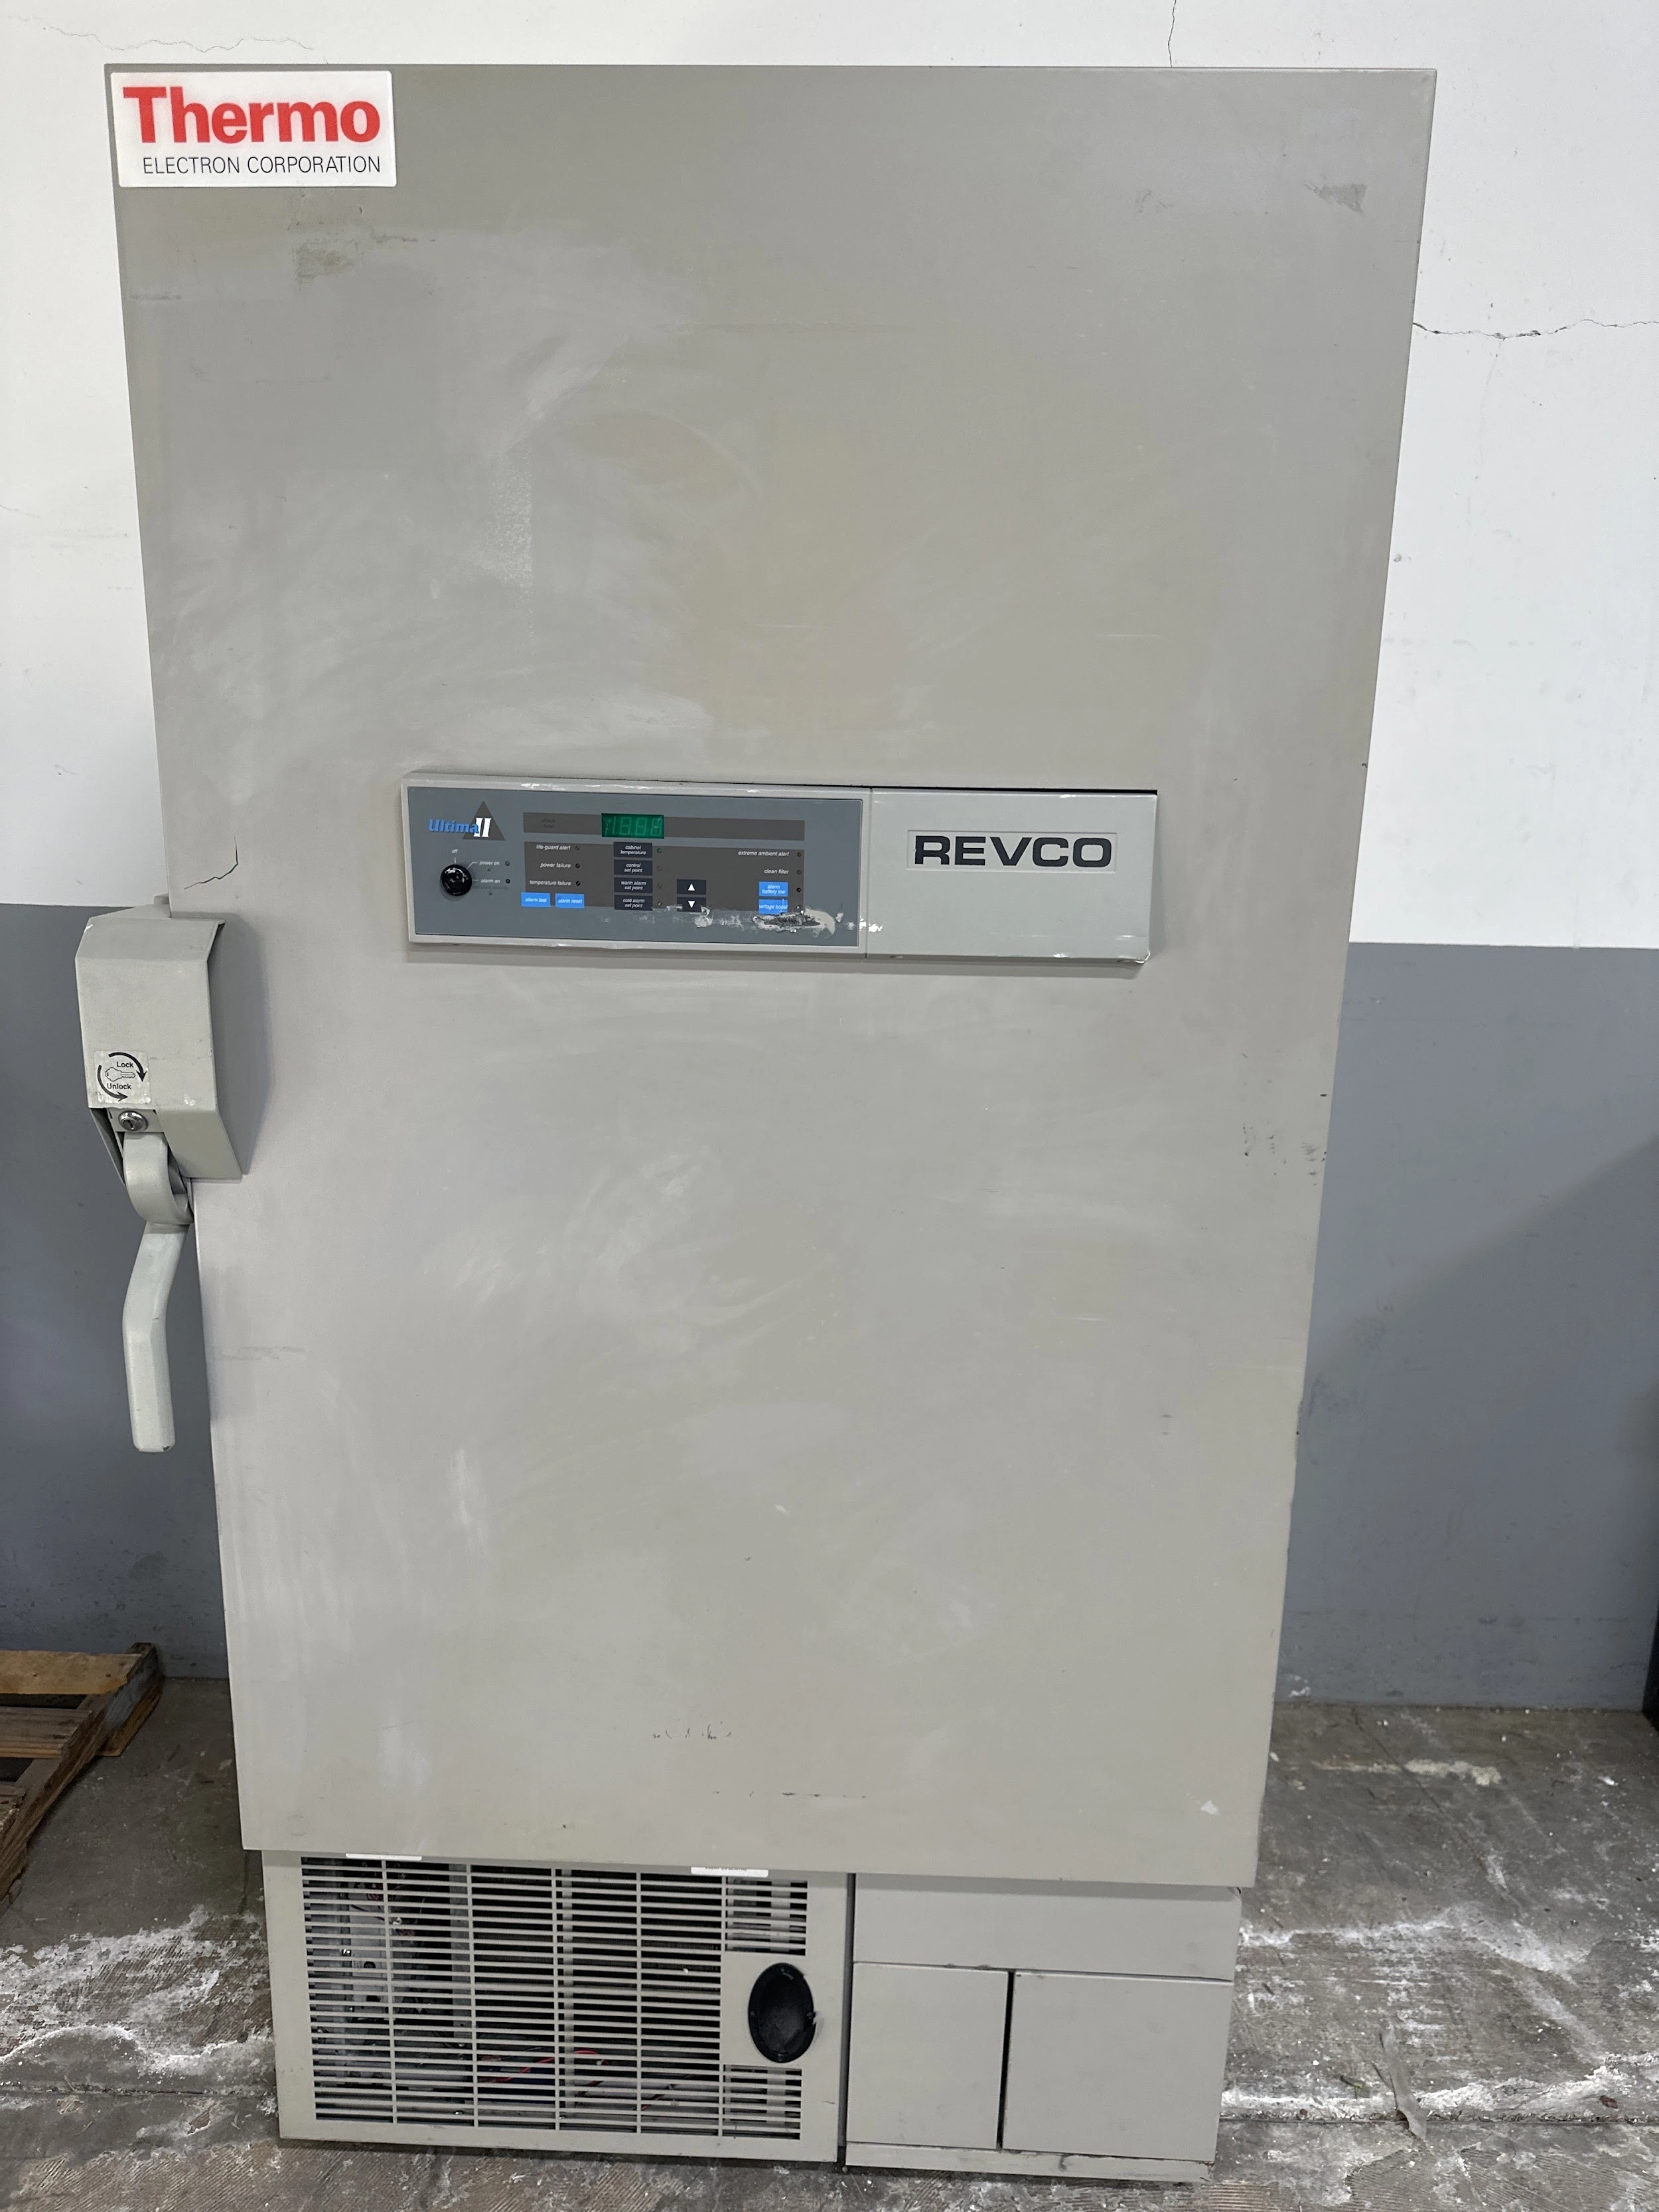 ThermoElectron Revco ULT2186-9-A40 UltraLow Temperature Freezer 12186R9A1B00100A